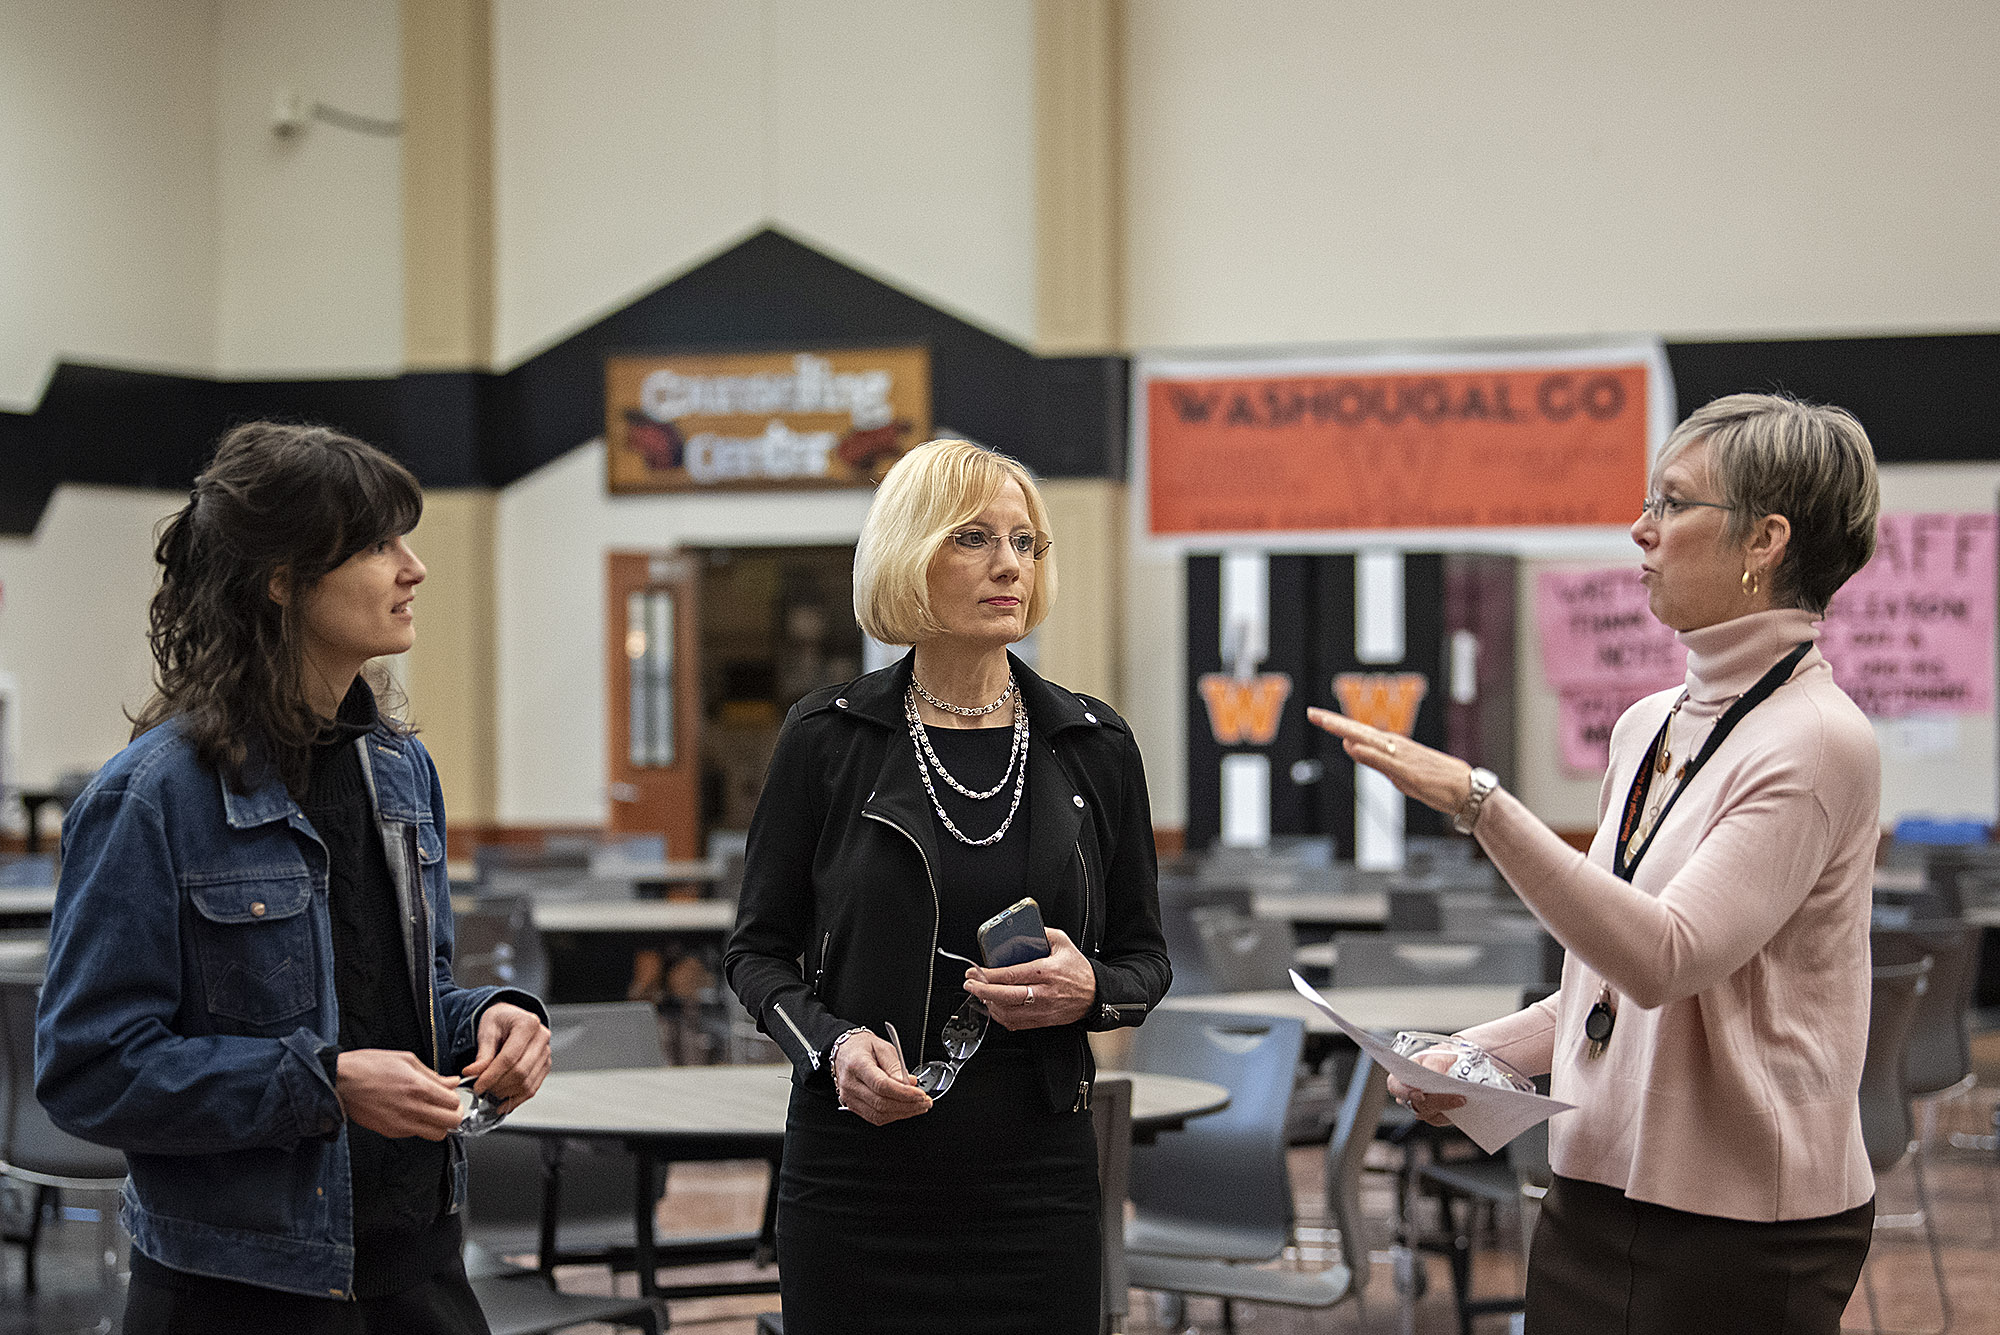 Rep. Marie Gluesenkamp Perez, from left, pauses to chat with Washougal School District Superintendent Mary Templeton and Margaret Rice, career and technical education director, at Washougal High School on Jan. 24.